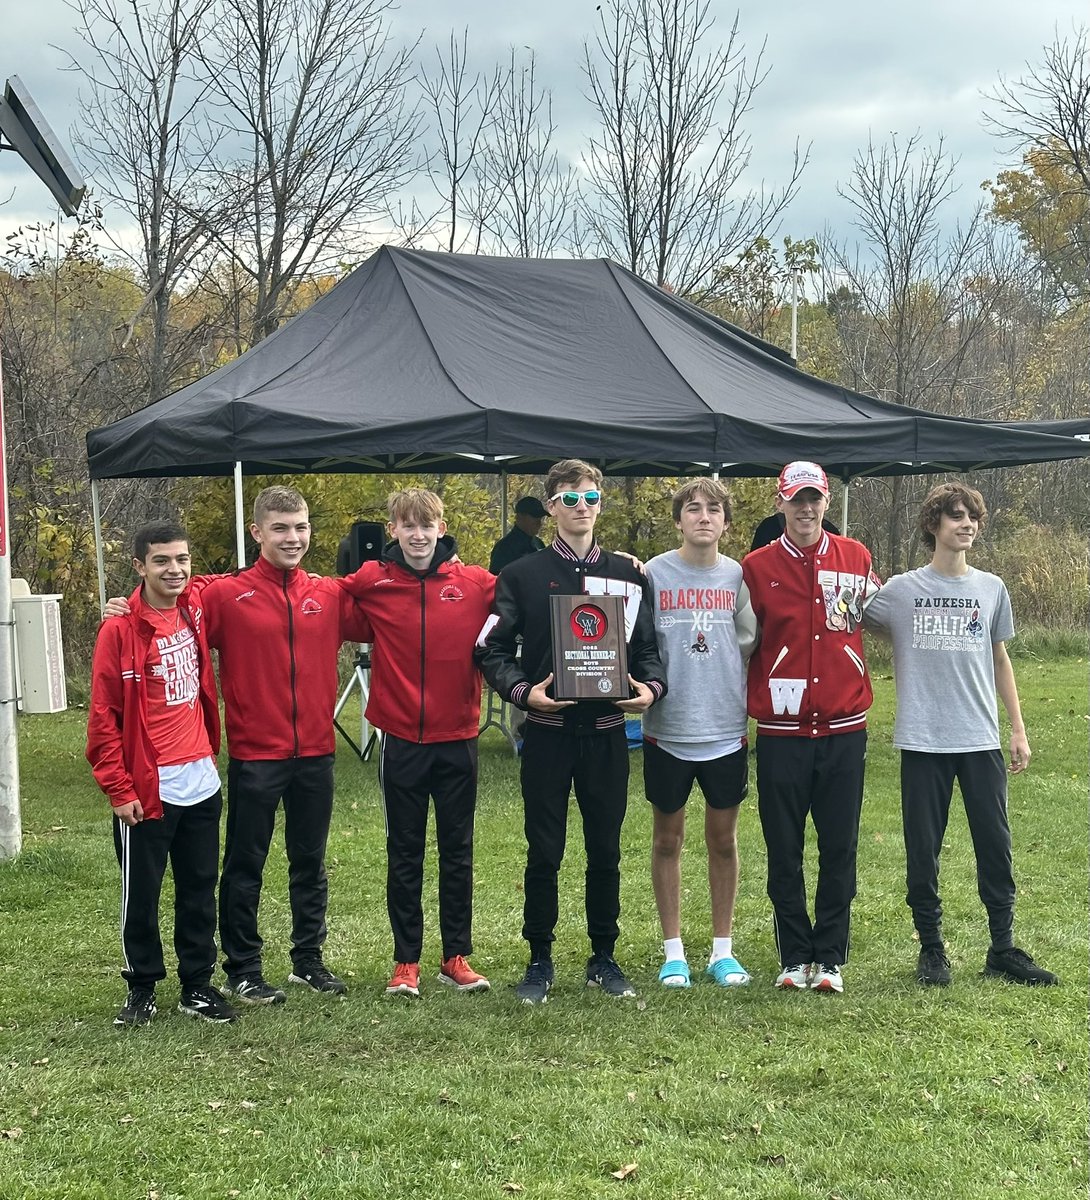 Let’s goooooo! Our Waukesha South boys cross country team is STATE Bound. A great day to run fast! These guys have been all in all year. #head #legs #heart #southside #allin #runfast